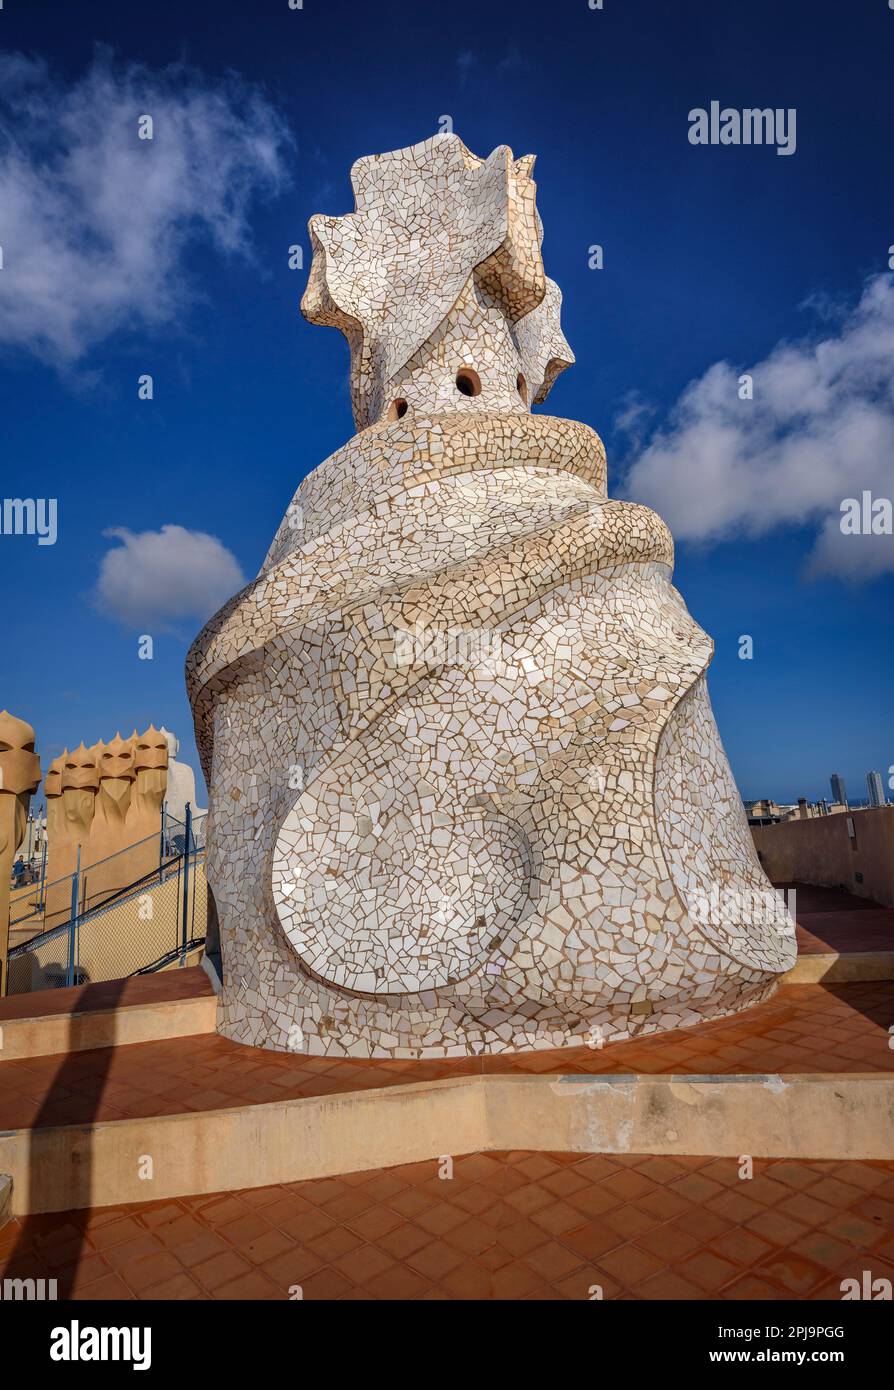 Top of the stairwell with the 4-armed cross designed by Gaudí on the rooftop terrace of Casa Milà - La Pedrera (Barcelona, Catalonia, Spain) Stock Photo